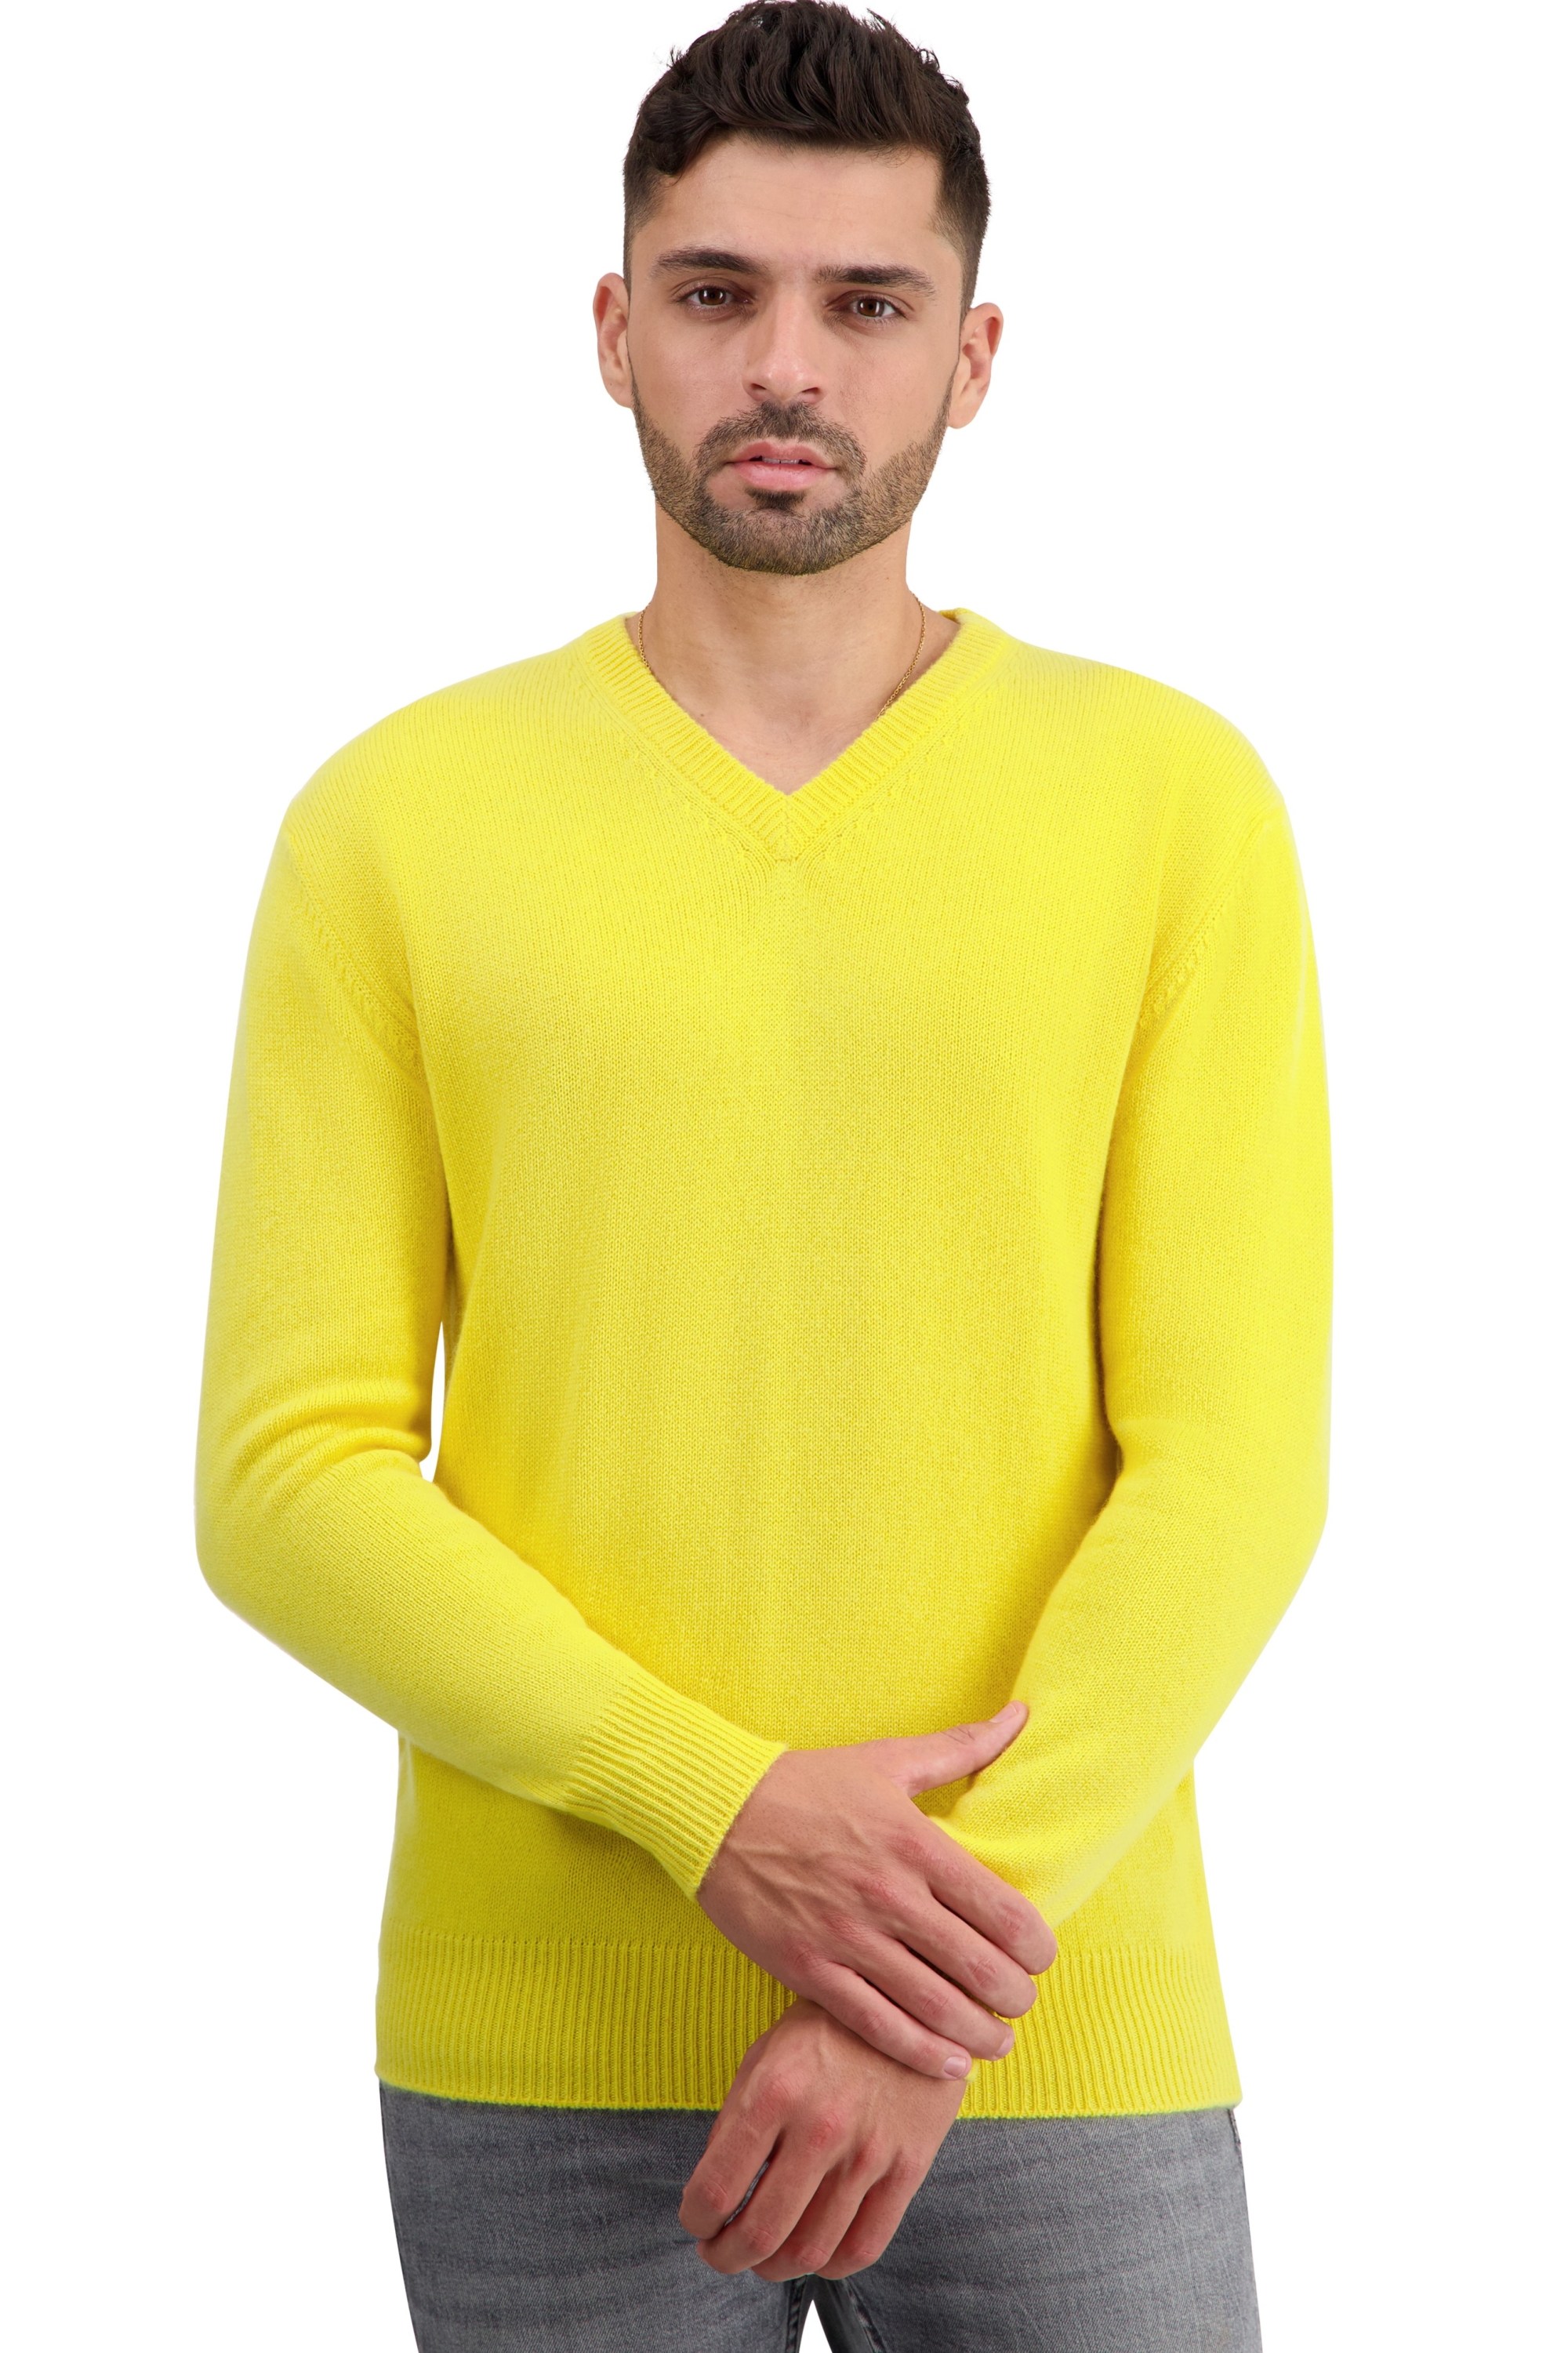 Cashmere men chunky sweater tour first daffodil 3xl